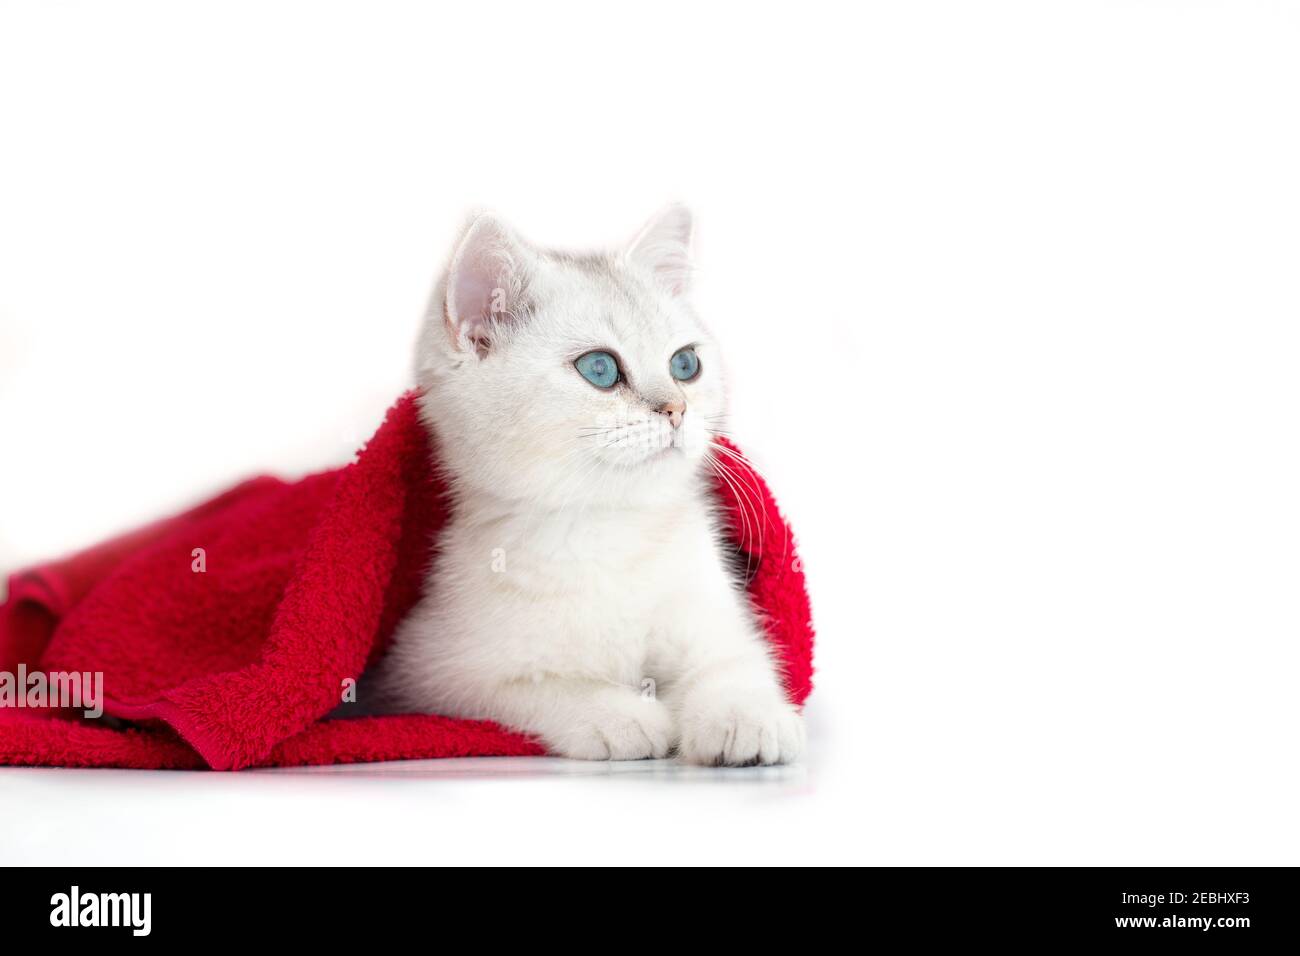 One white cute kitten lies in a red towel on a white background Stock Photo